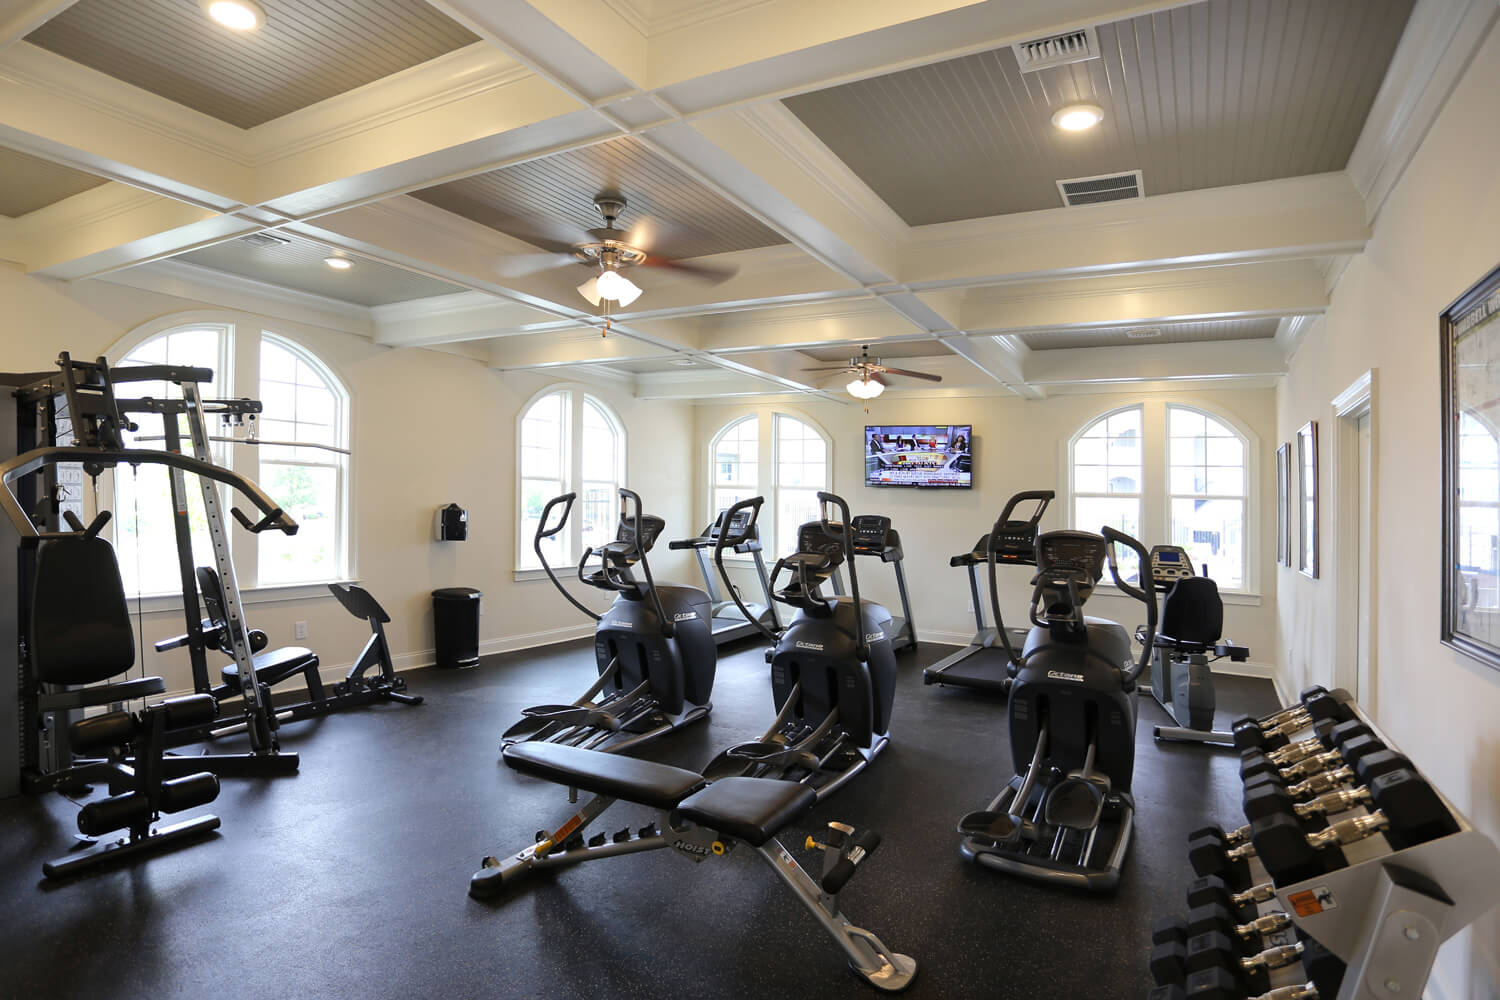 The Morgan Apartments Clubhouse Designed by Foshee Architecture - Fitness Center Room